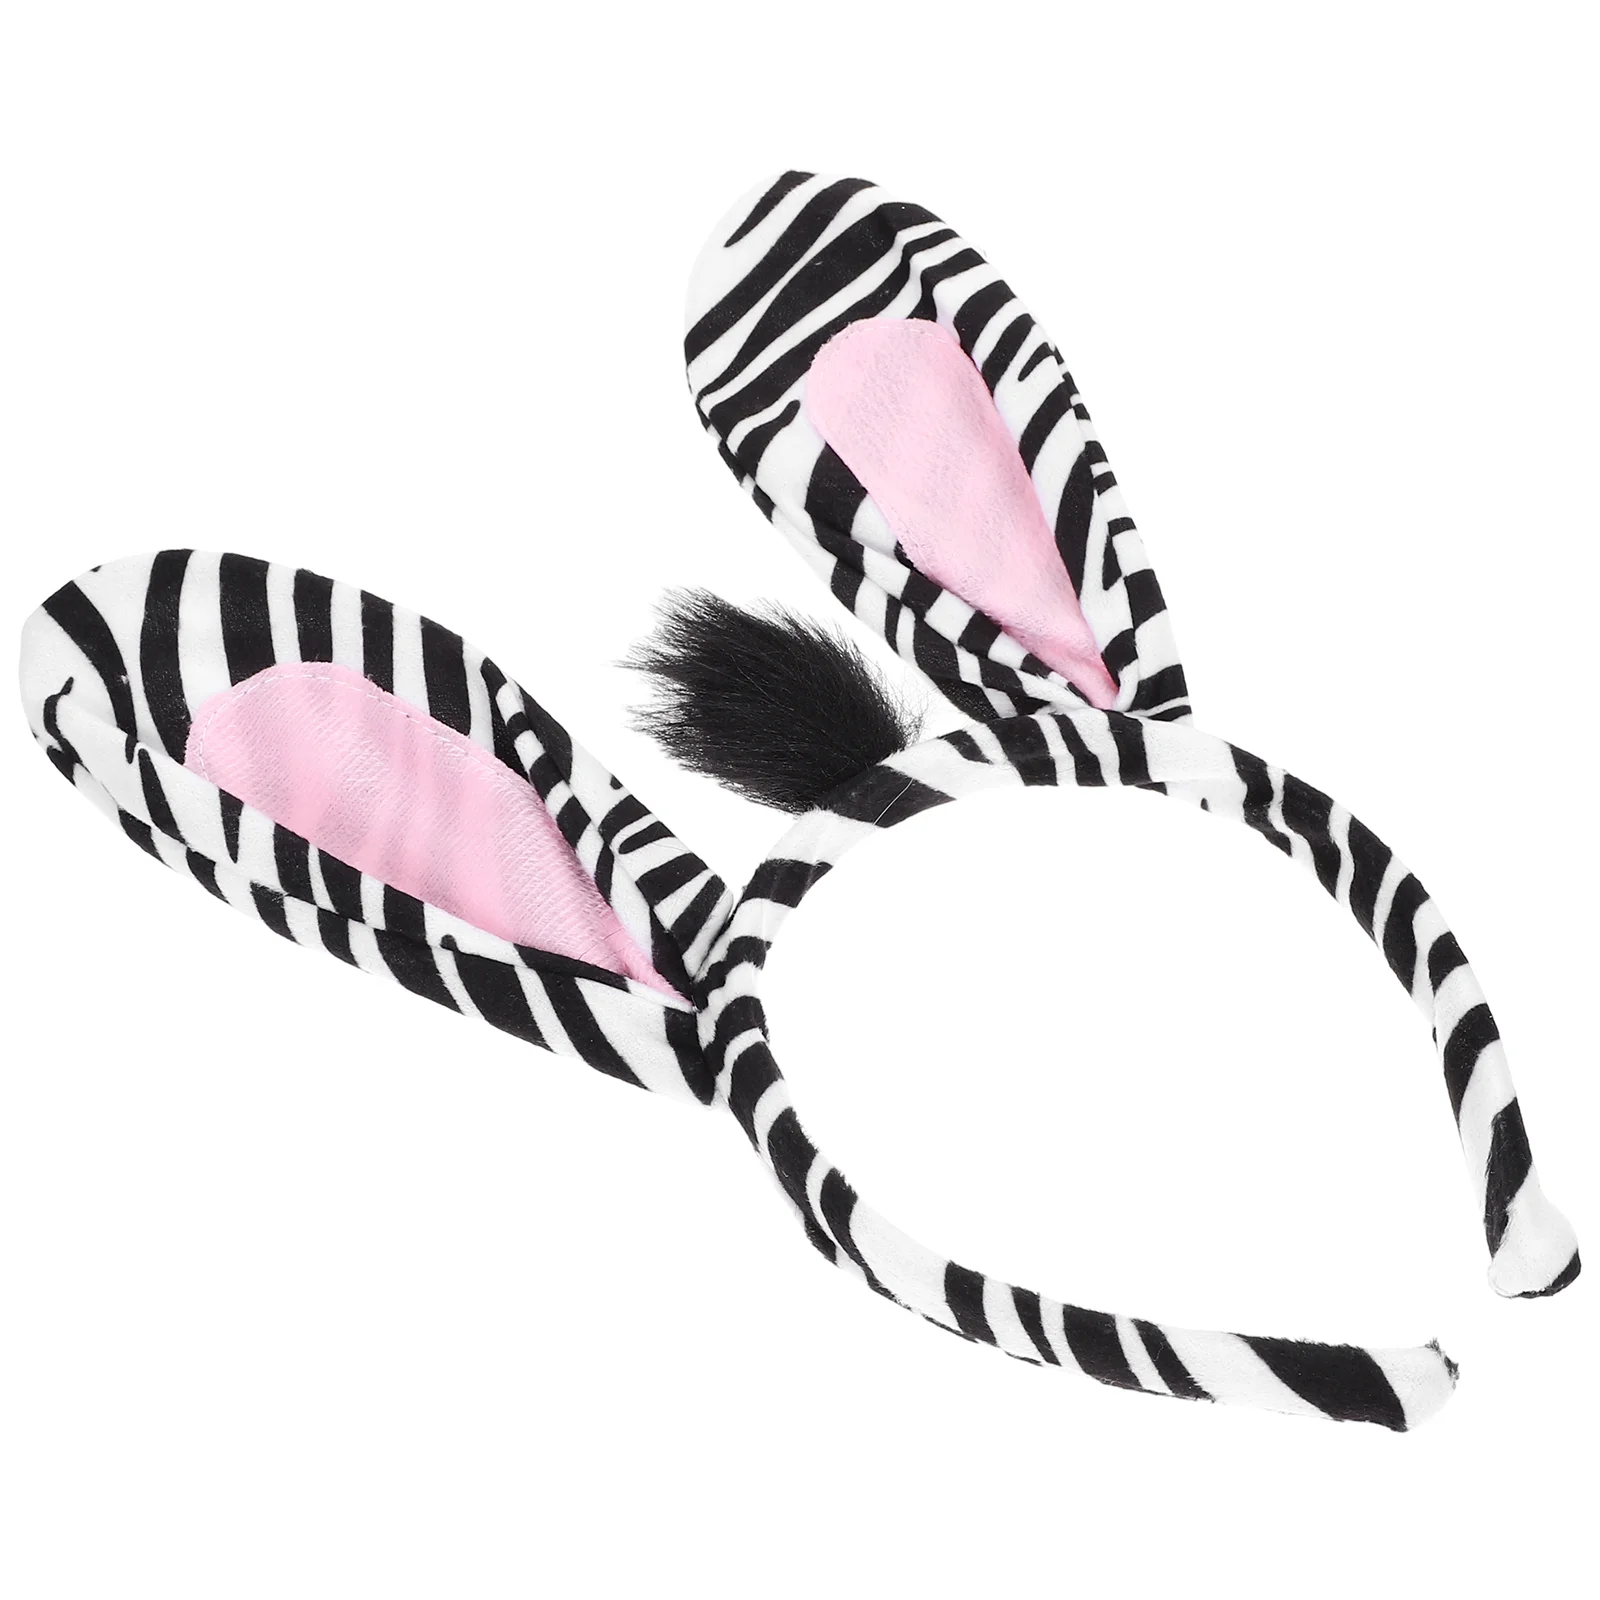 

Animal Hair Cosplay Party Supplies Lovely Zebra Ear Design Headband Accessory Hairwear Performance Masquerade Party Favors